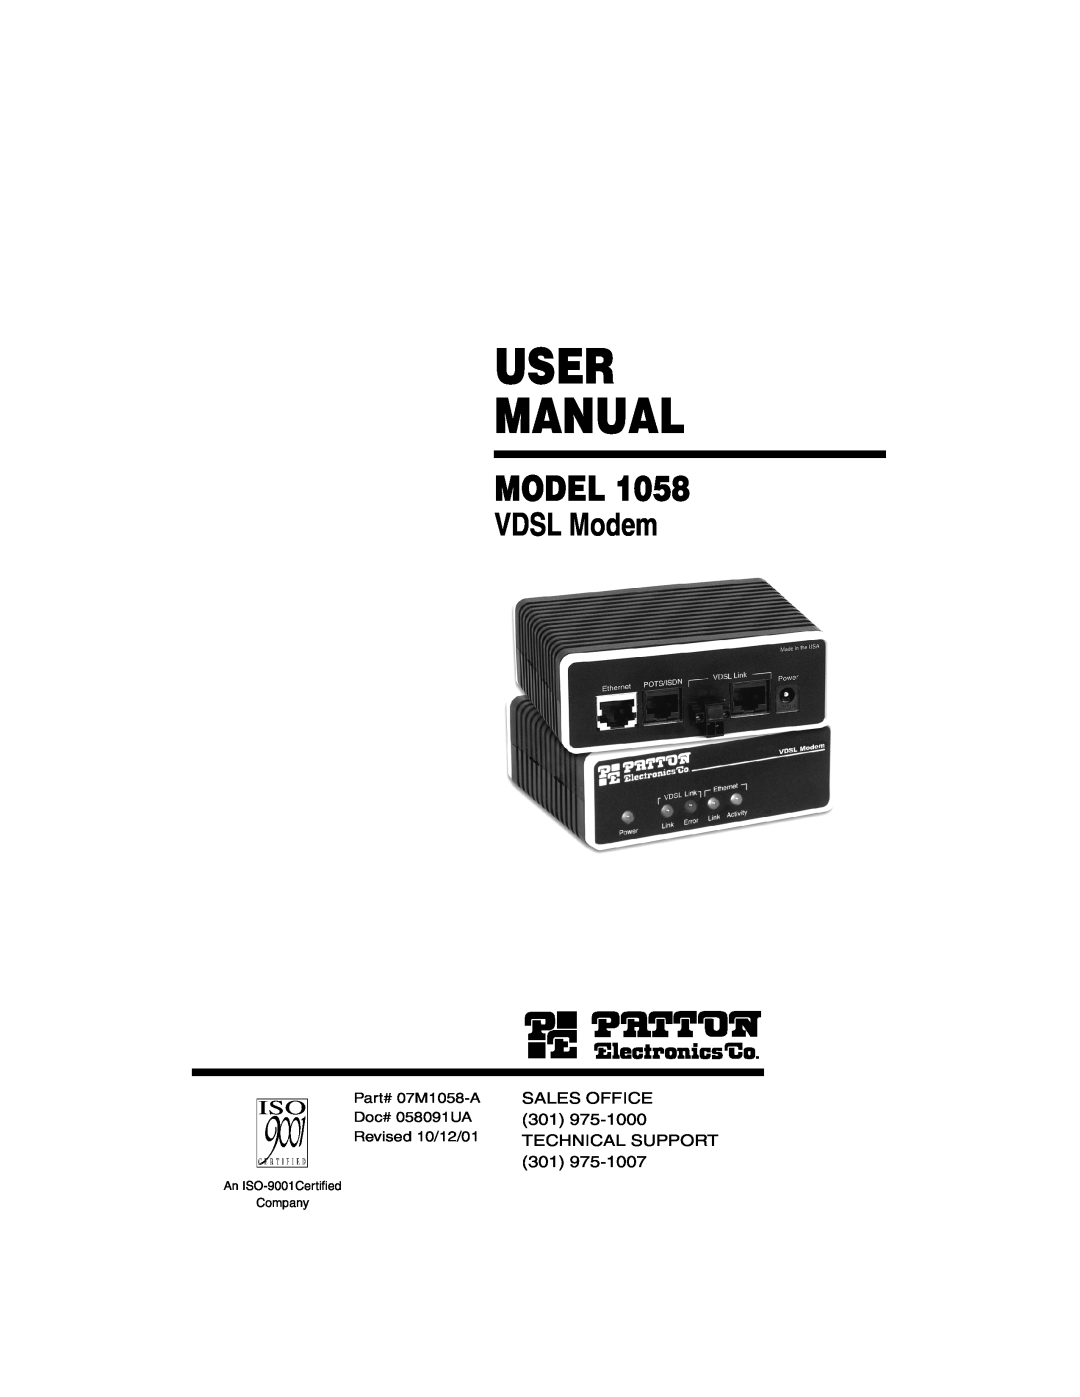 Patton electronic Model 1058 user manual User Manual, VDSL Modem, An ISO-9001Certiﬁed Company 